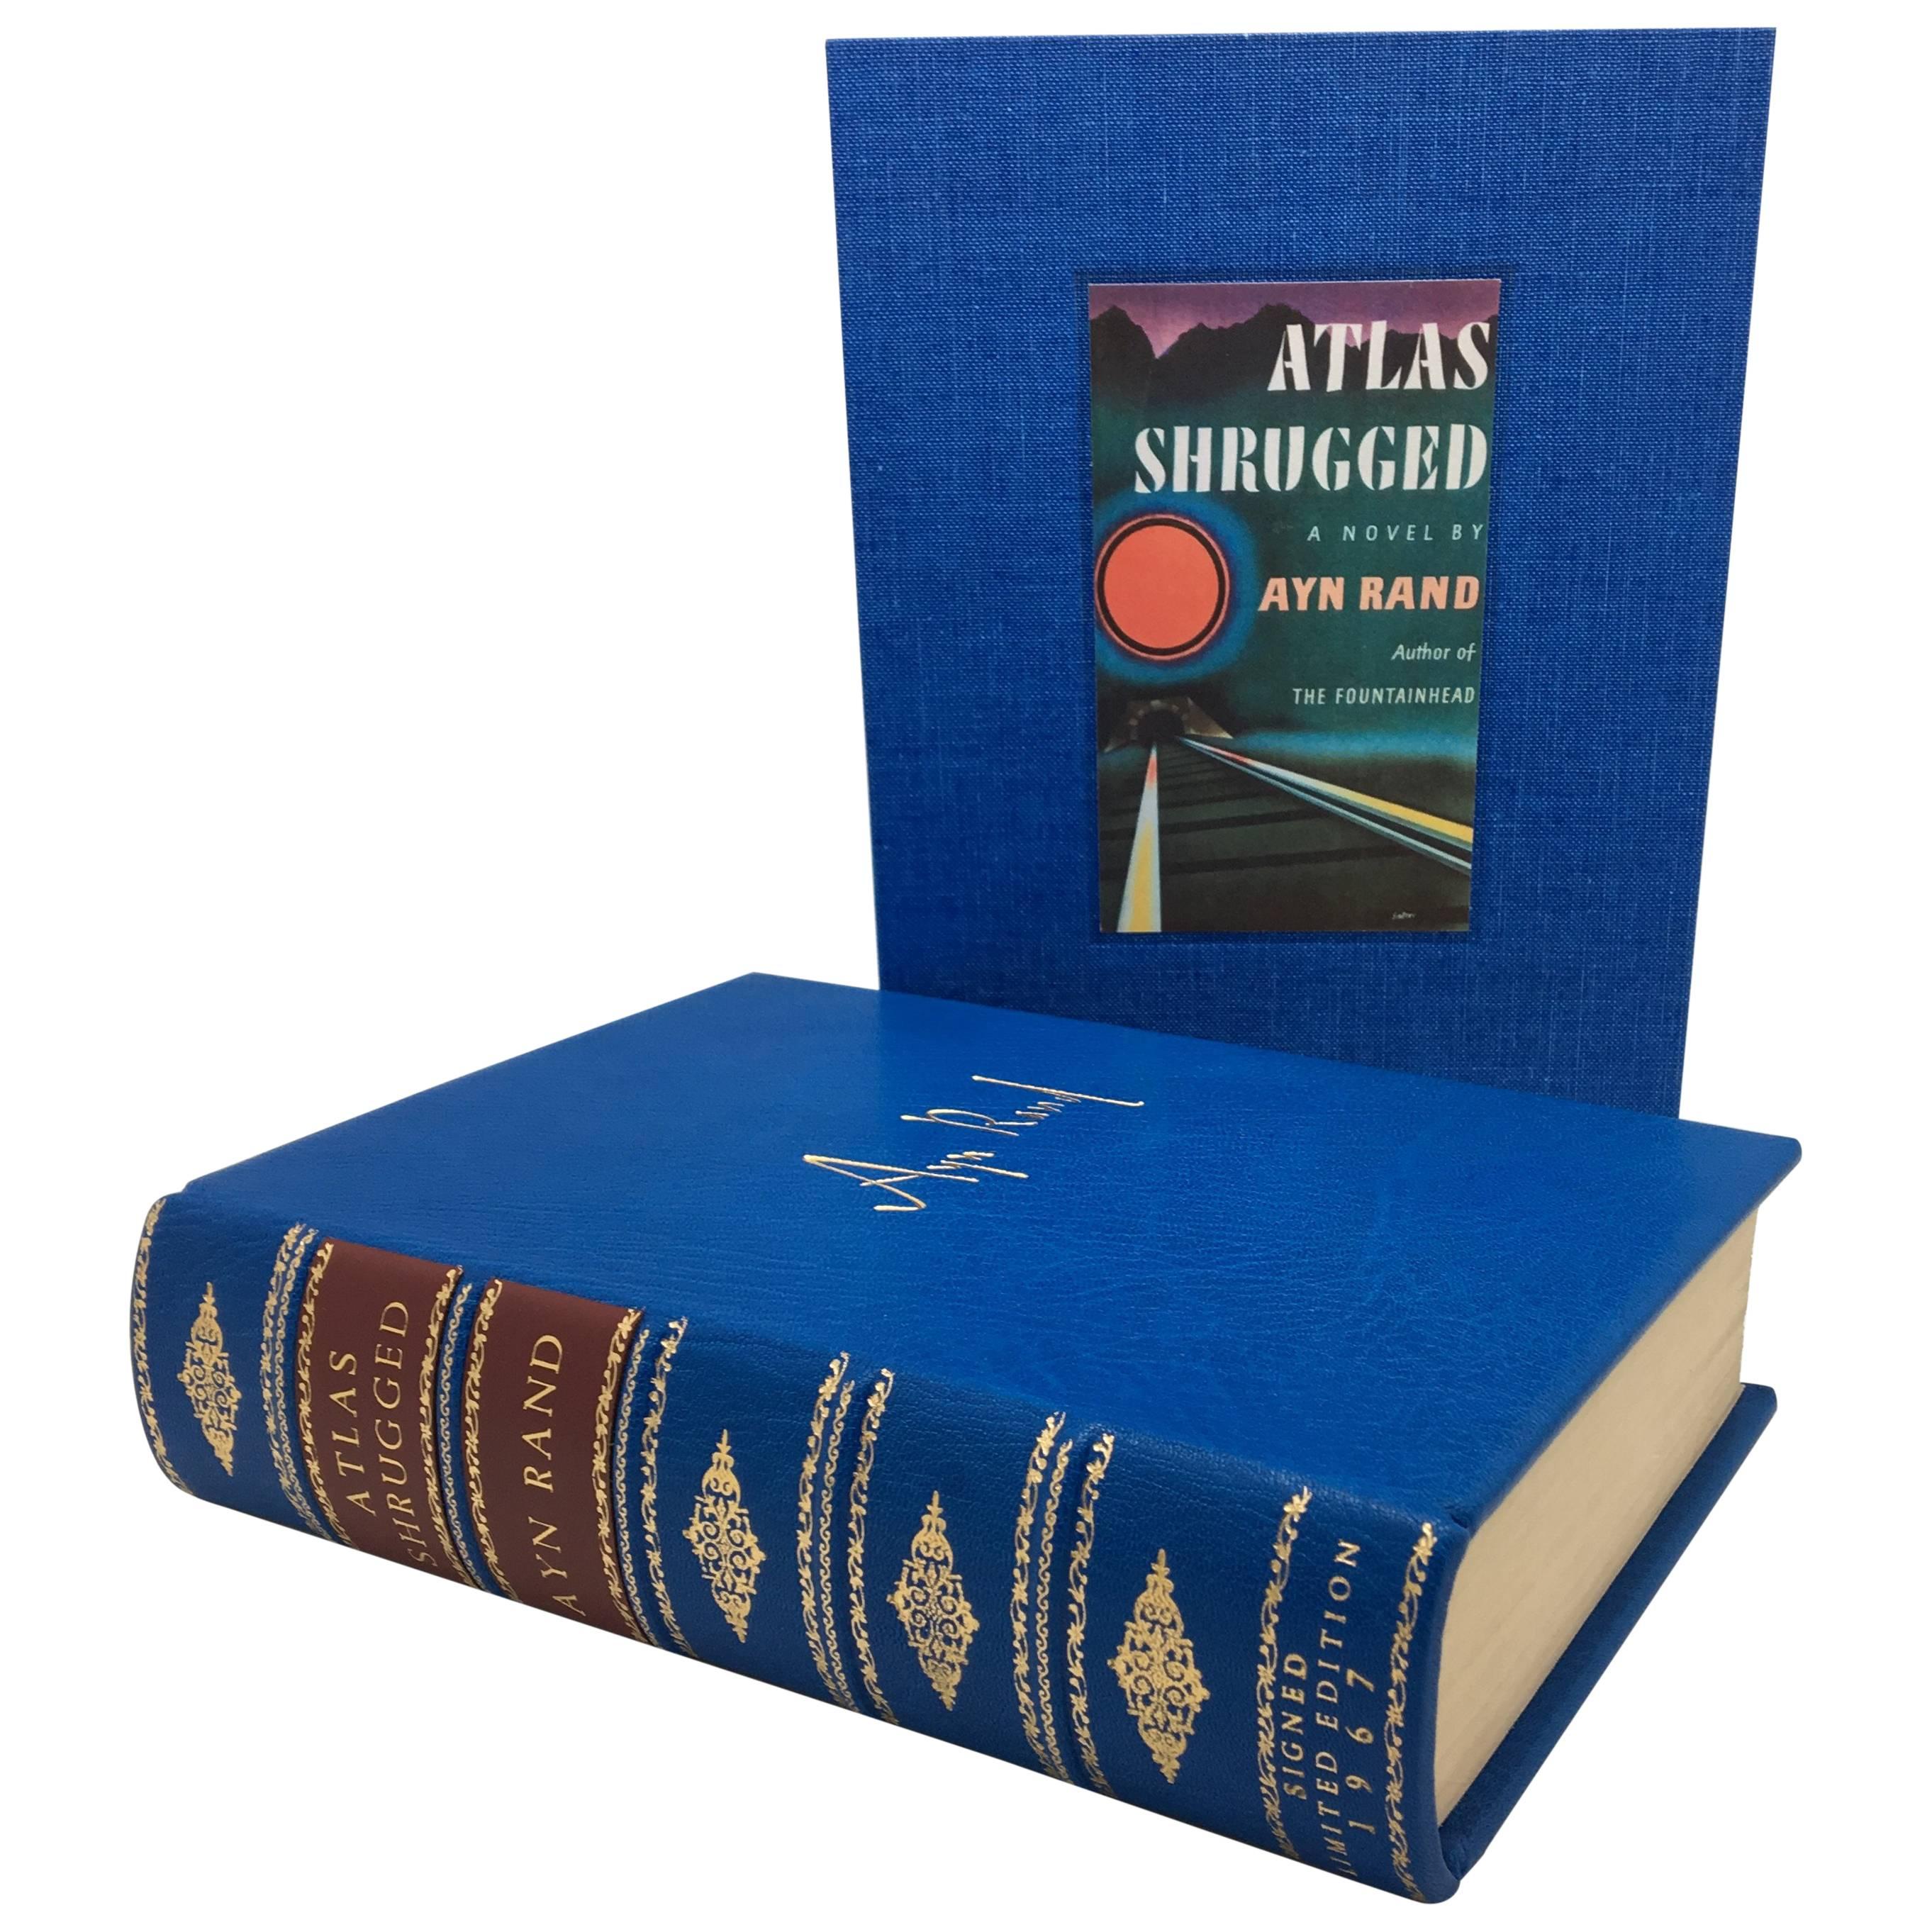 Atlas Shrugged by Ayn Rand, Signed Limited Anniversary Edition, 1967